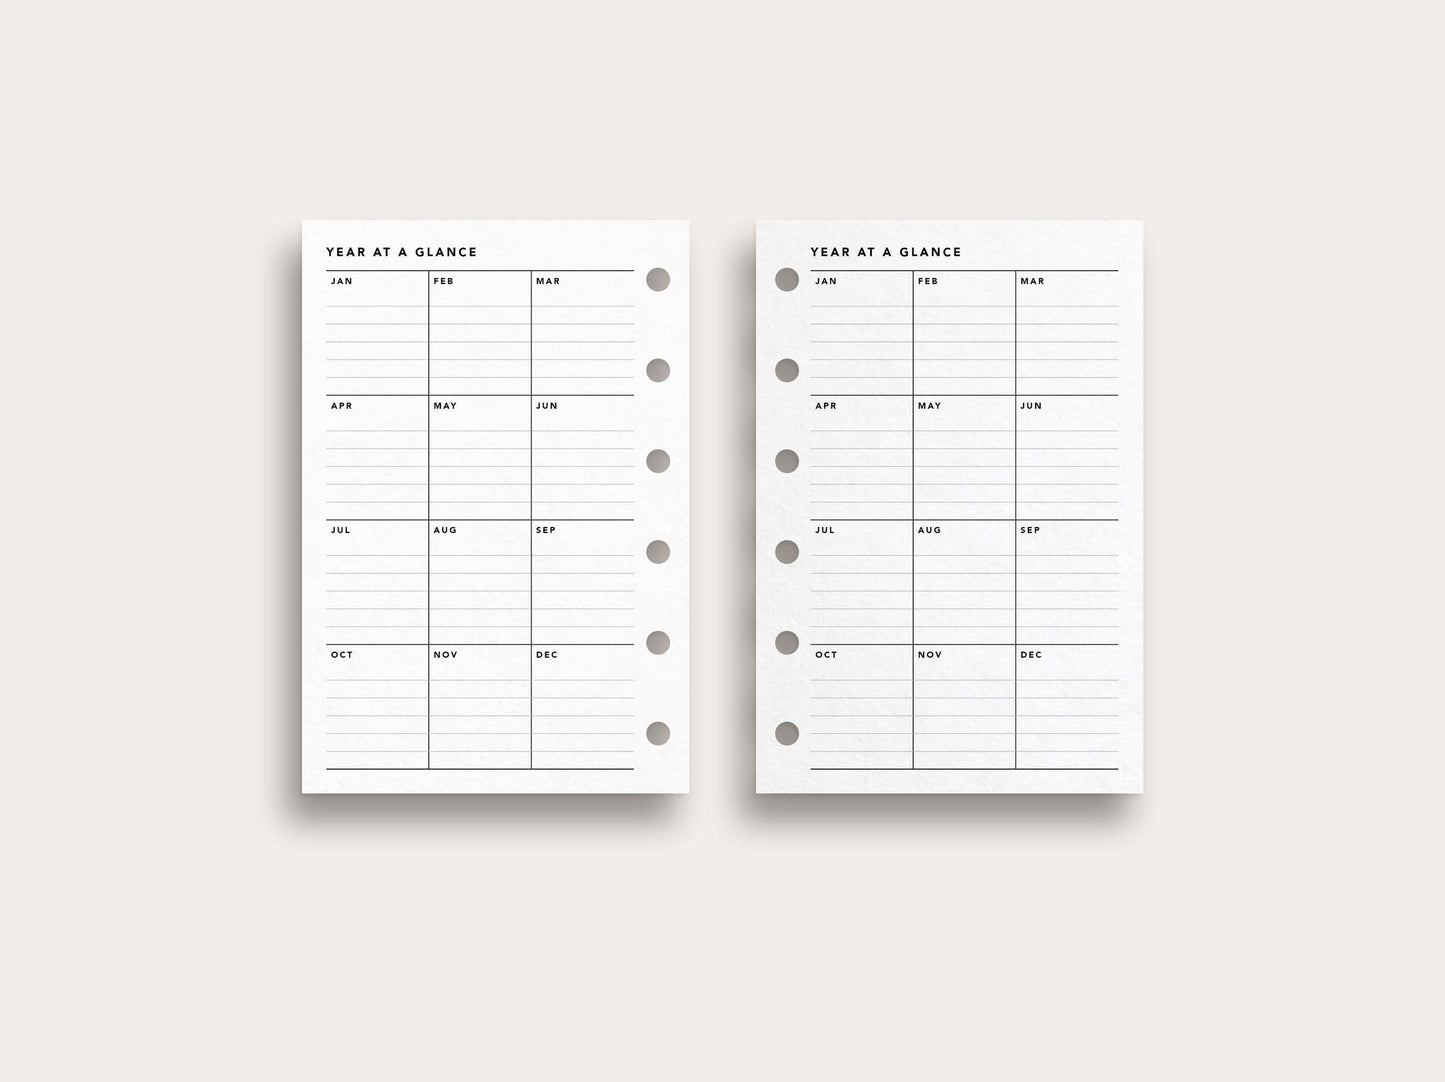 Yearly Planner No. 5 / Year at a Glance